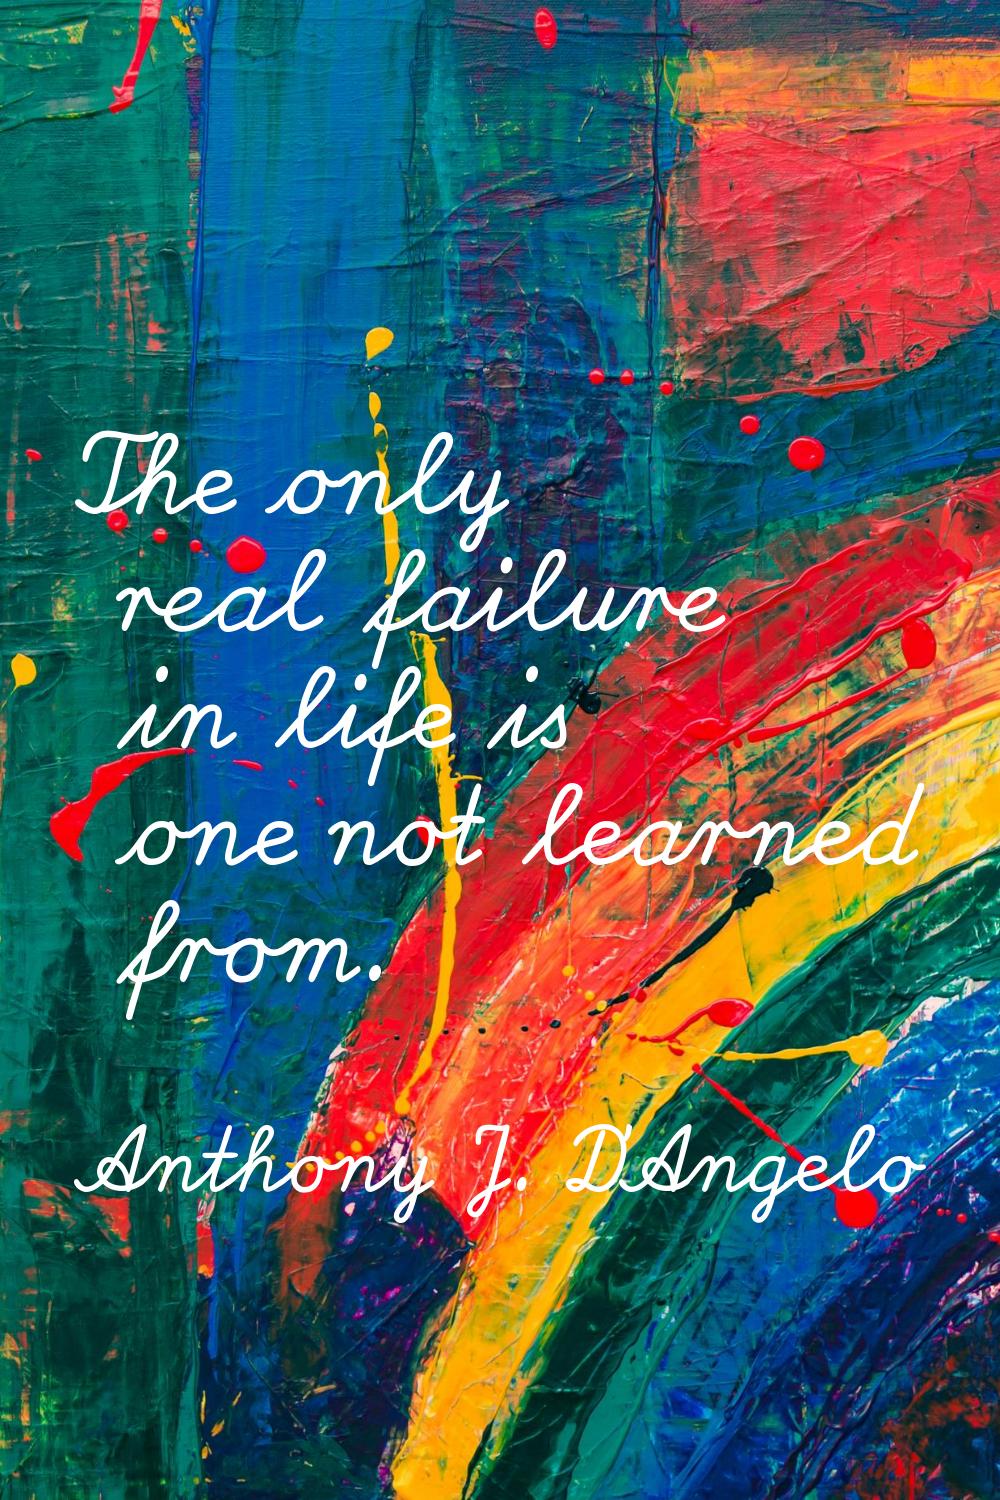 The only real failure in life is one not learned from.